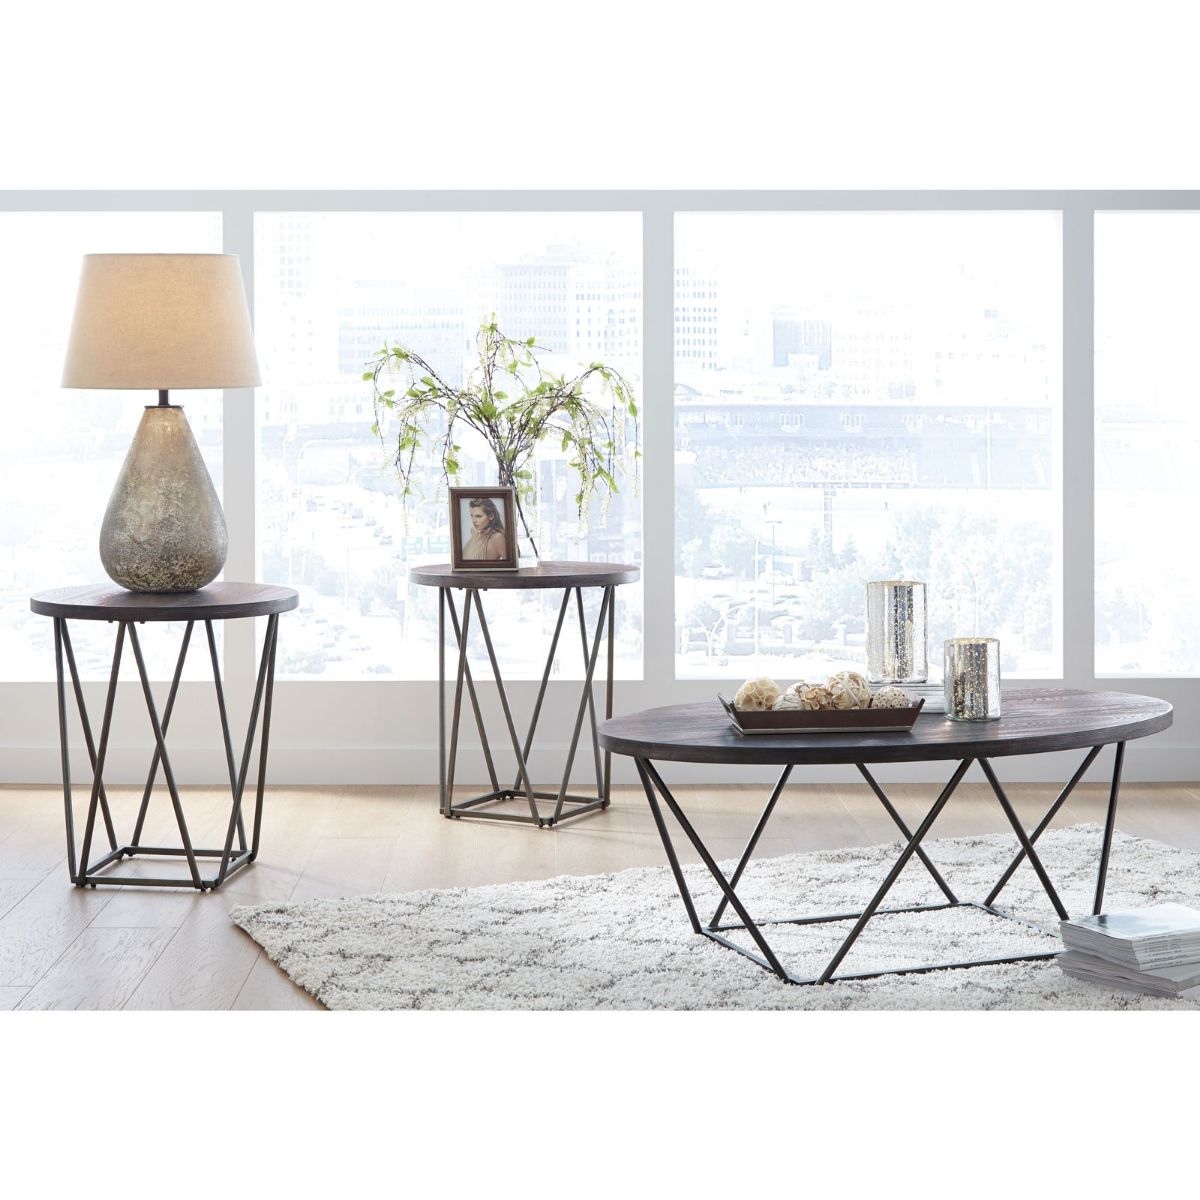 Picture of Neimhurst 3-Pack of Tables